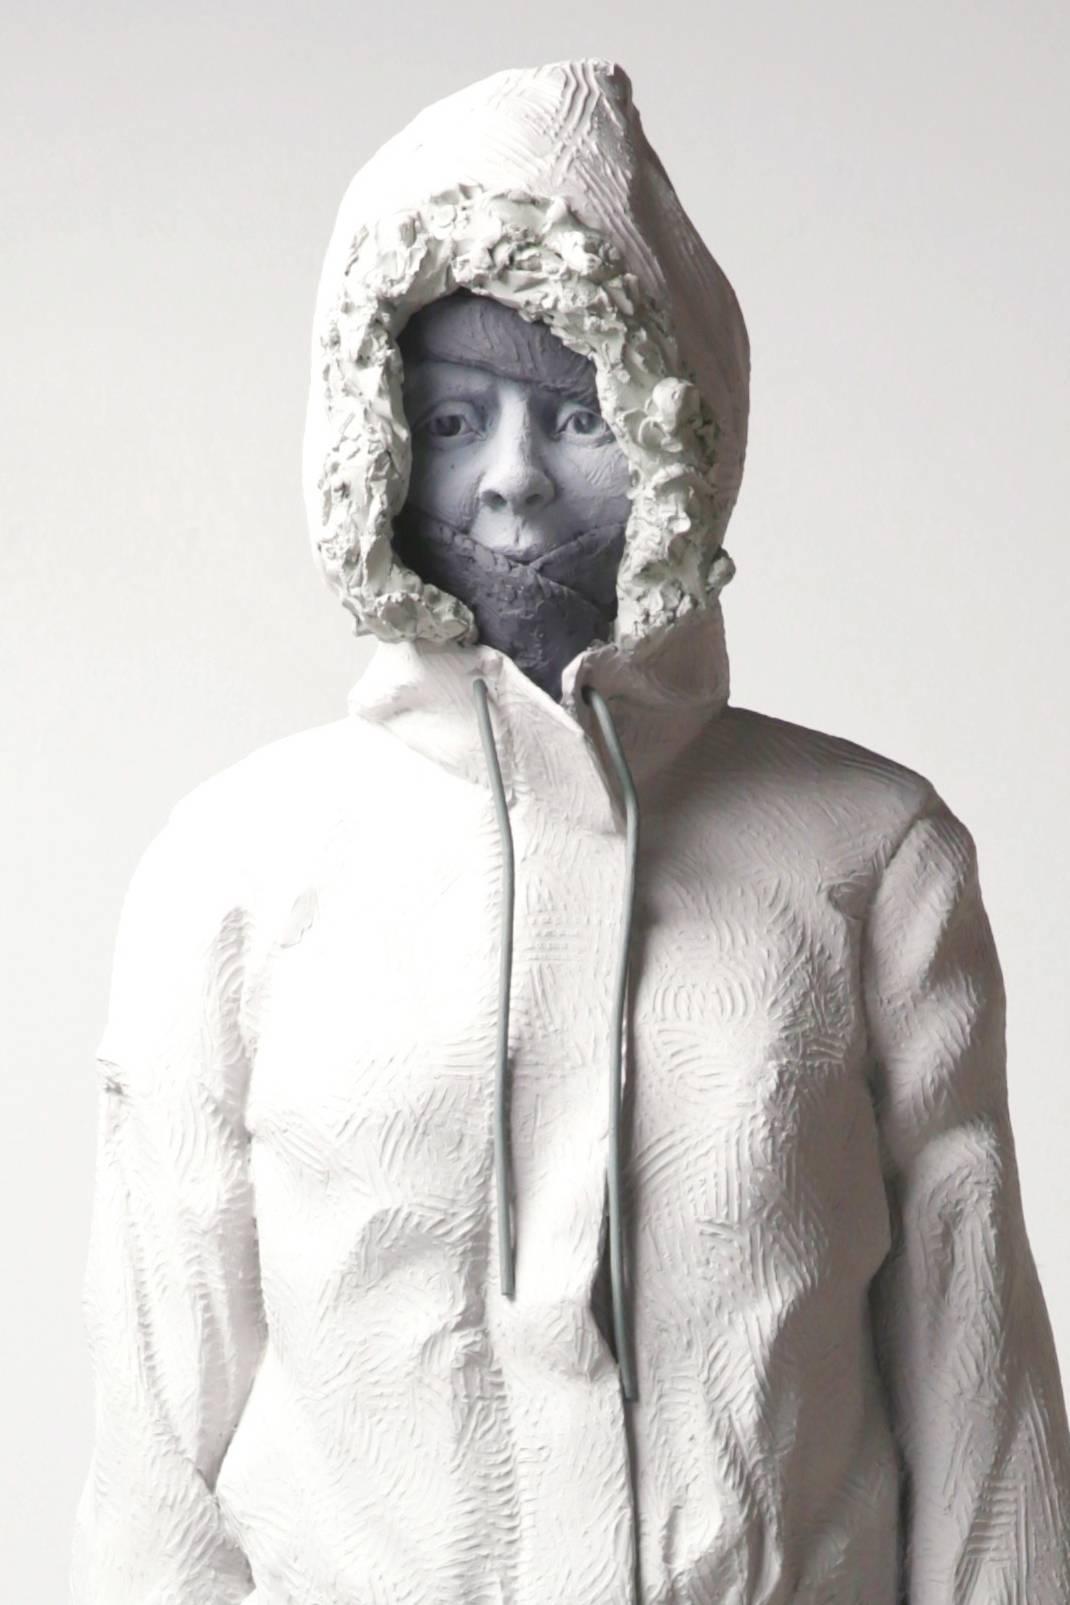 Pending Ice 2 of 3 - tall, figurative, female, greyscale, resin sculpture - Sculpture by Nicholas Crombach